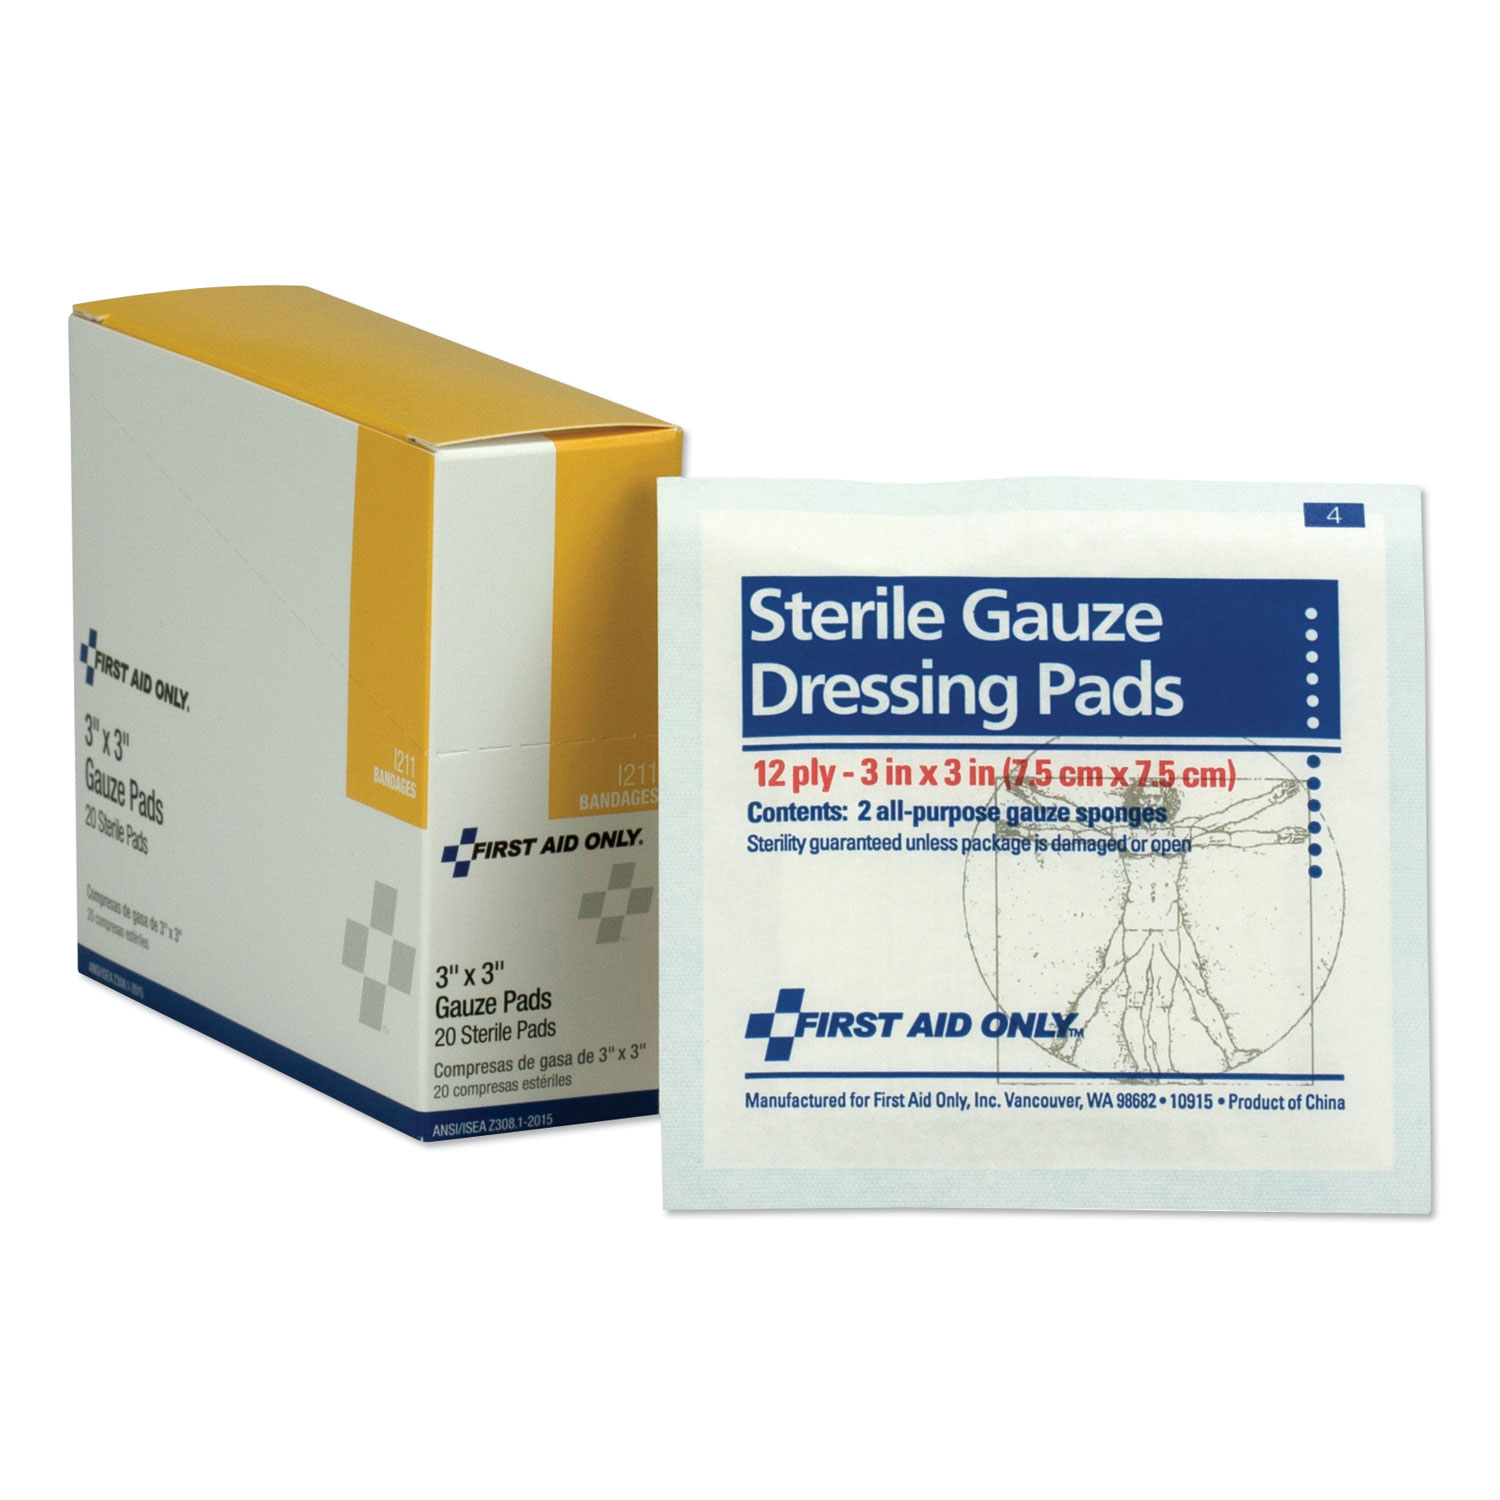 First Aid Only I-211 Gauze Dressing Pads, 3 x 3, 10/Box - image 2 of 2